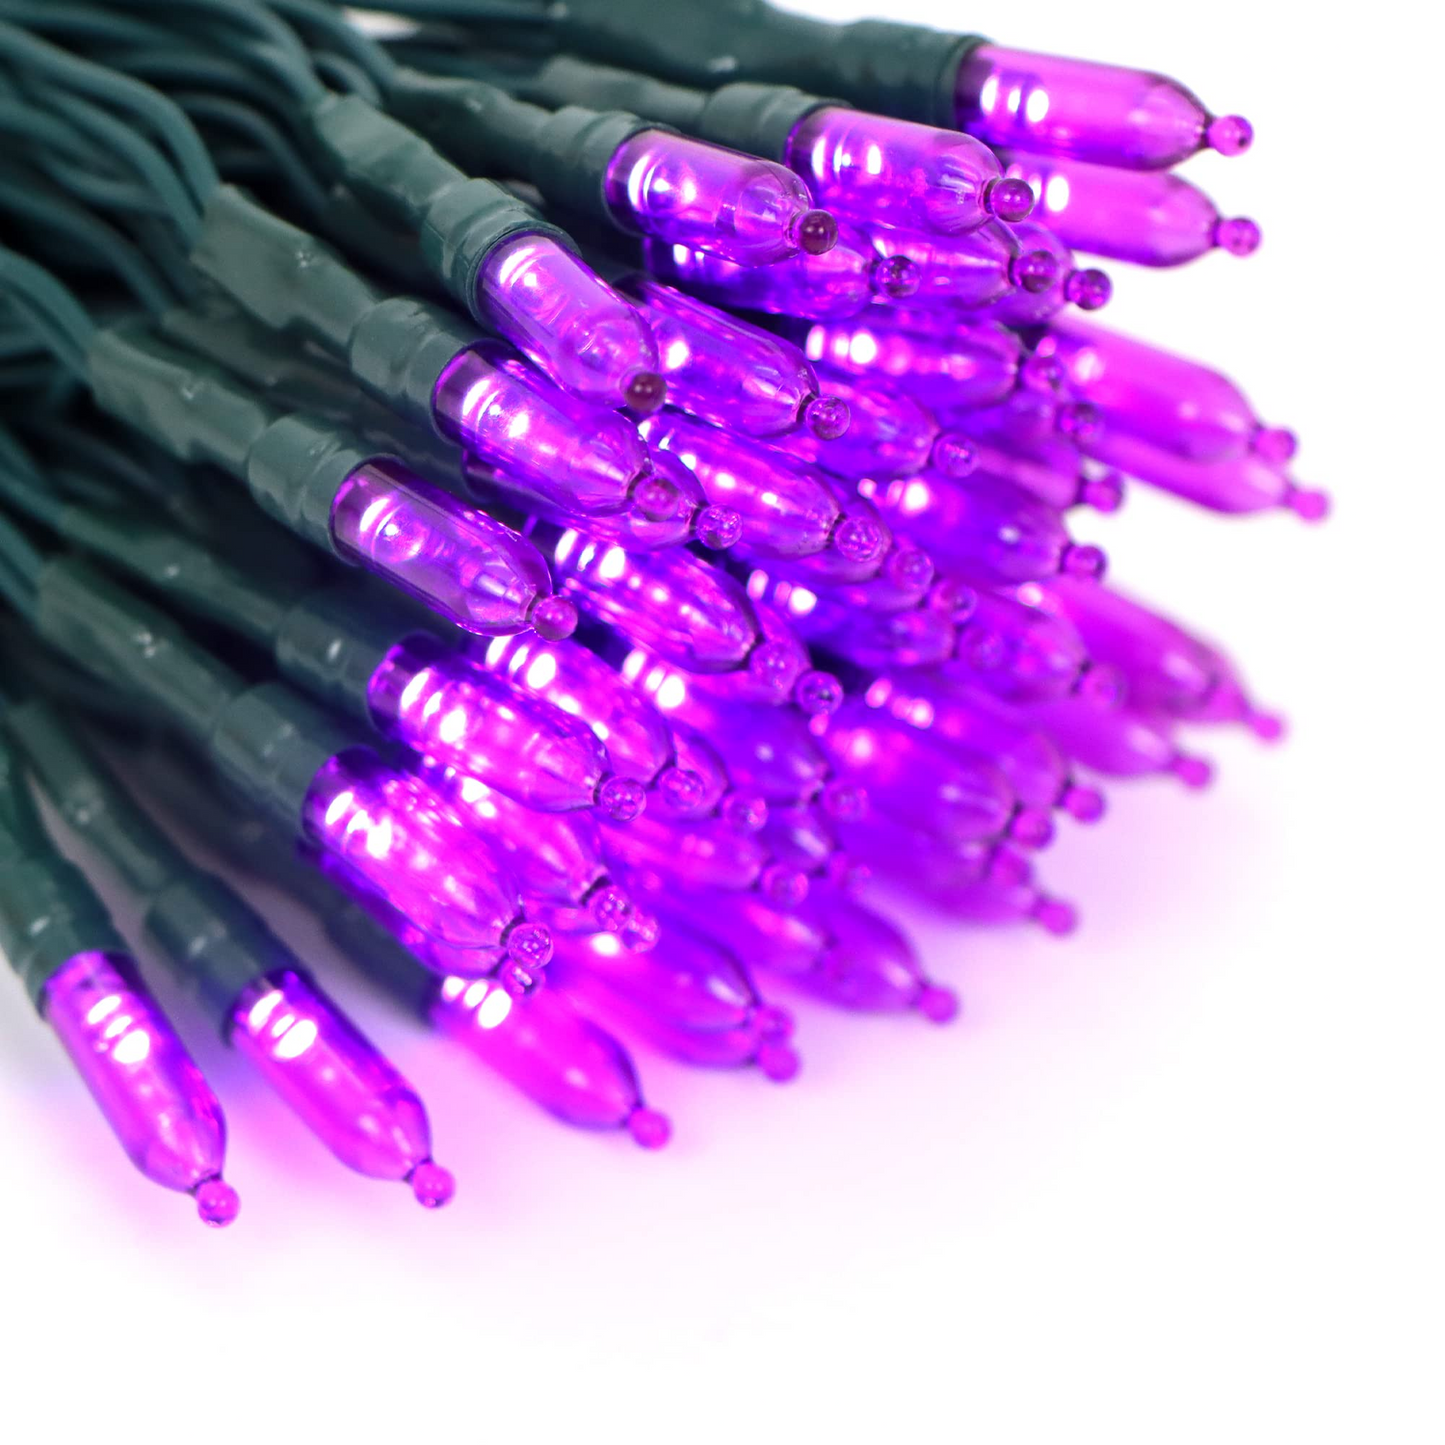 2x50 Purple LED Green Wire String Lights